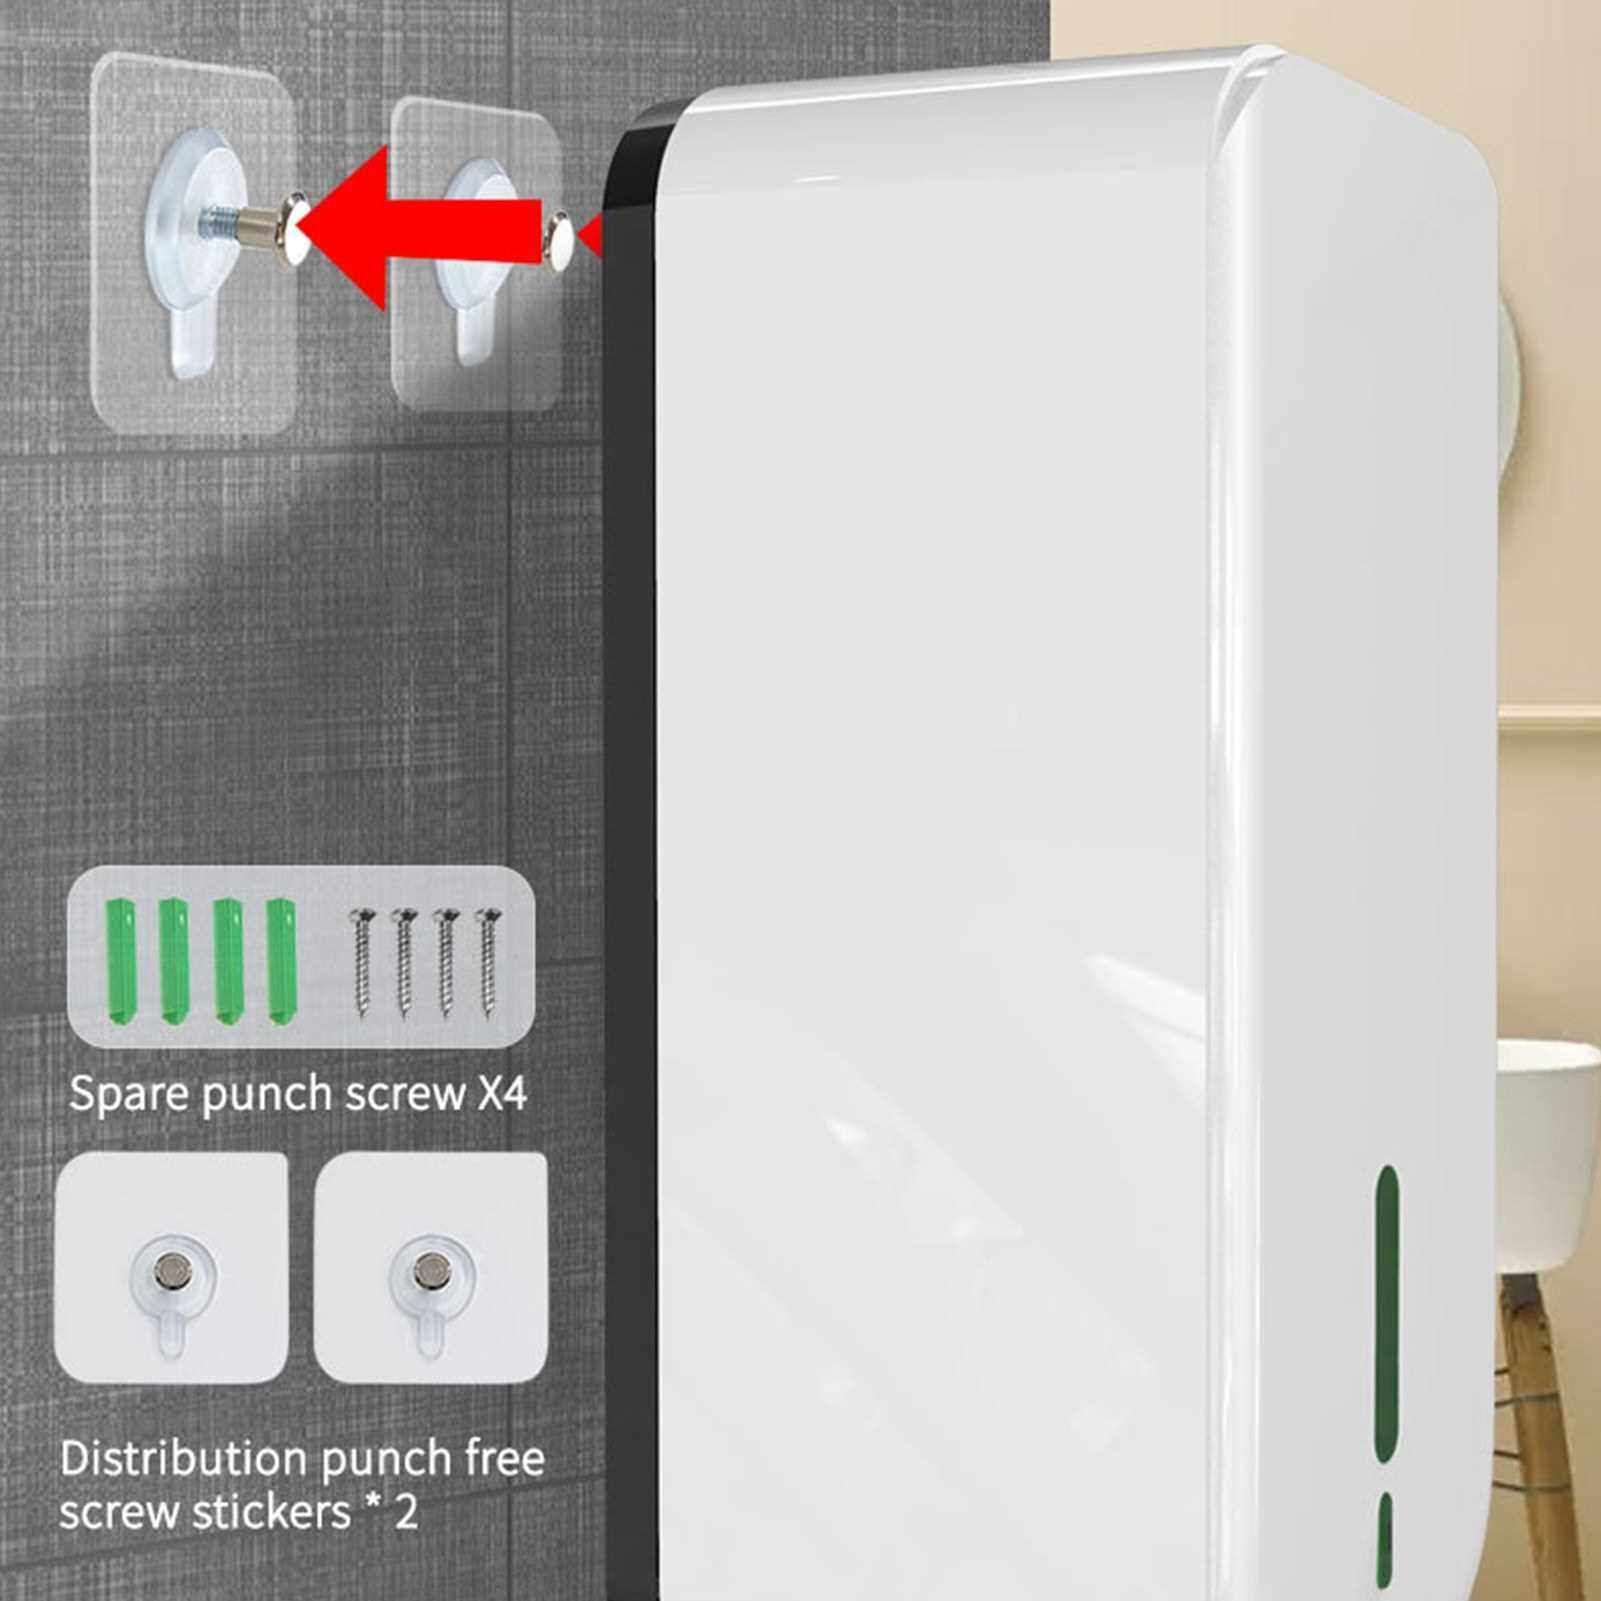 1500mL Automatic Soap Dispenser Drip Type Touchless Hand Sanitizer Machine with IR Sensor Nail-free Drilling Wall-Mounted for Home School Restaurant Office Commercial Use (Silver)